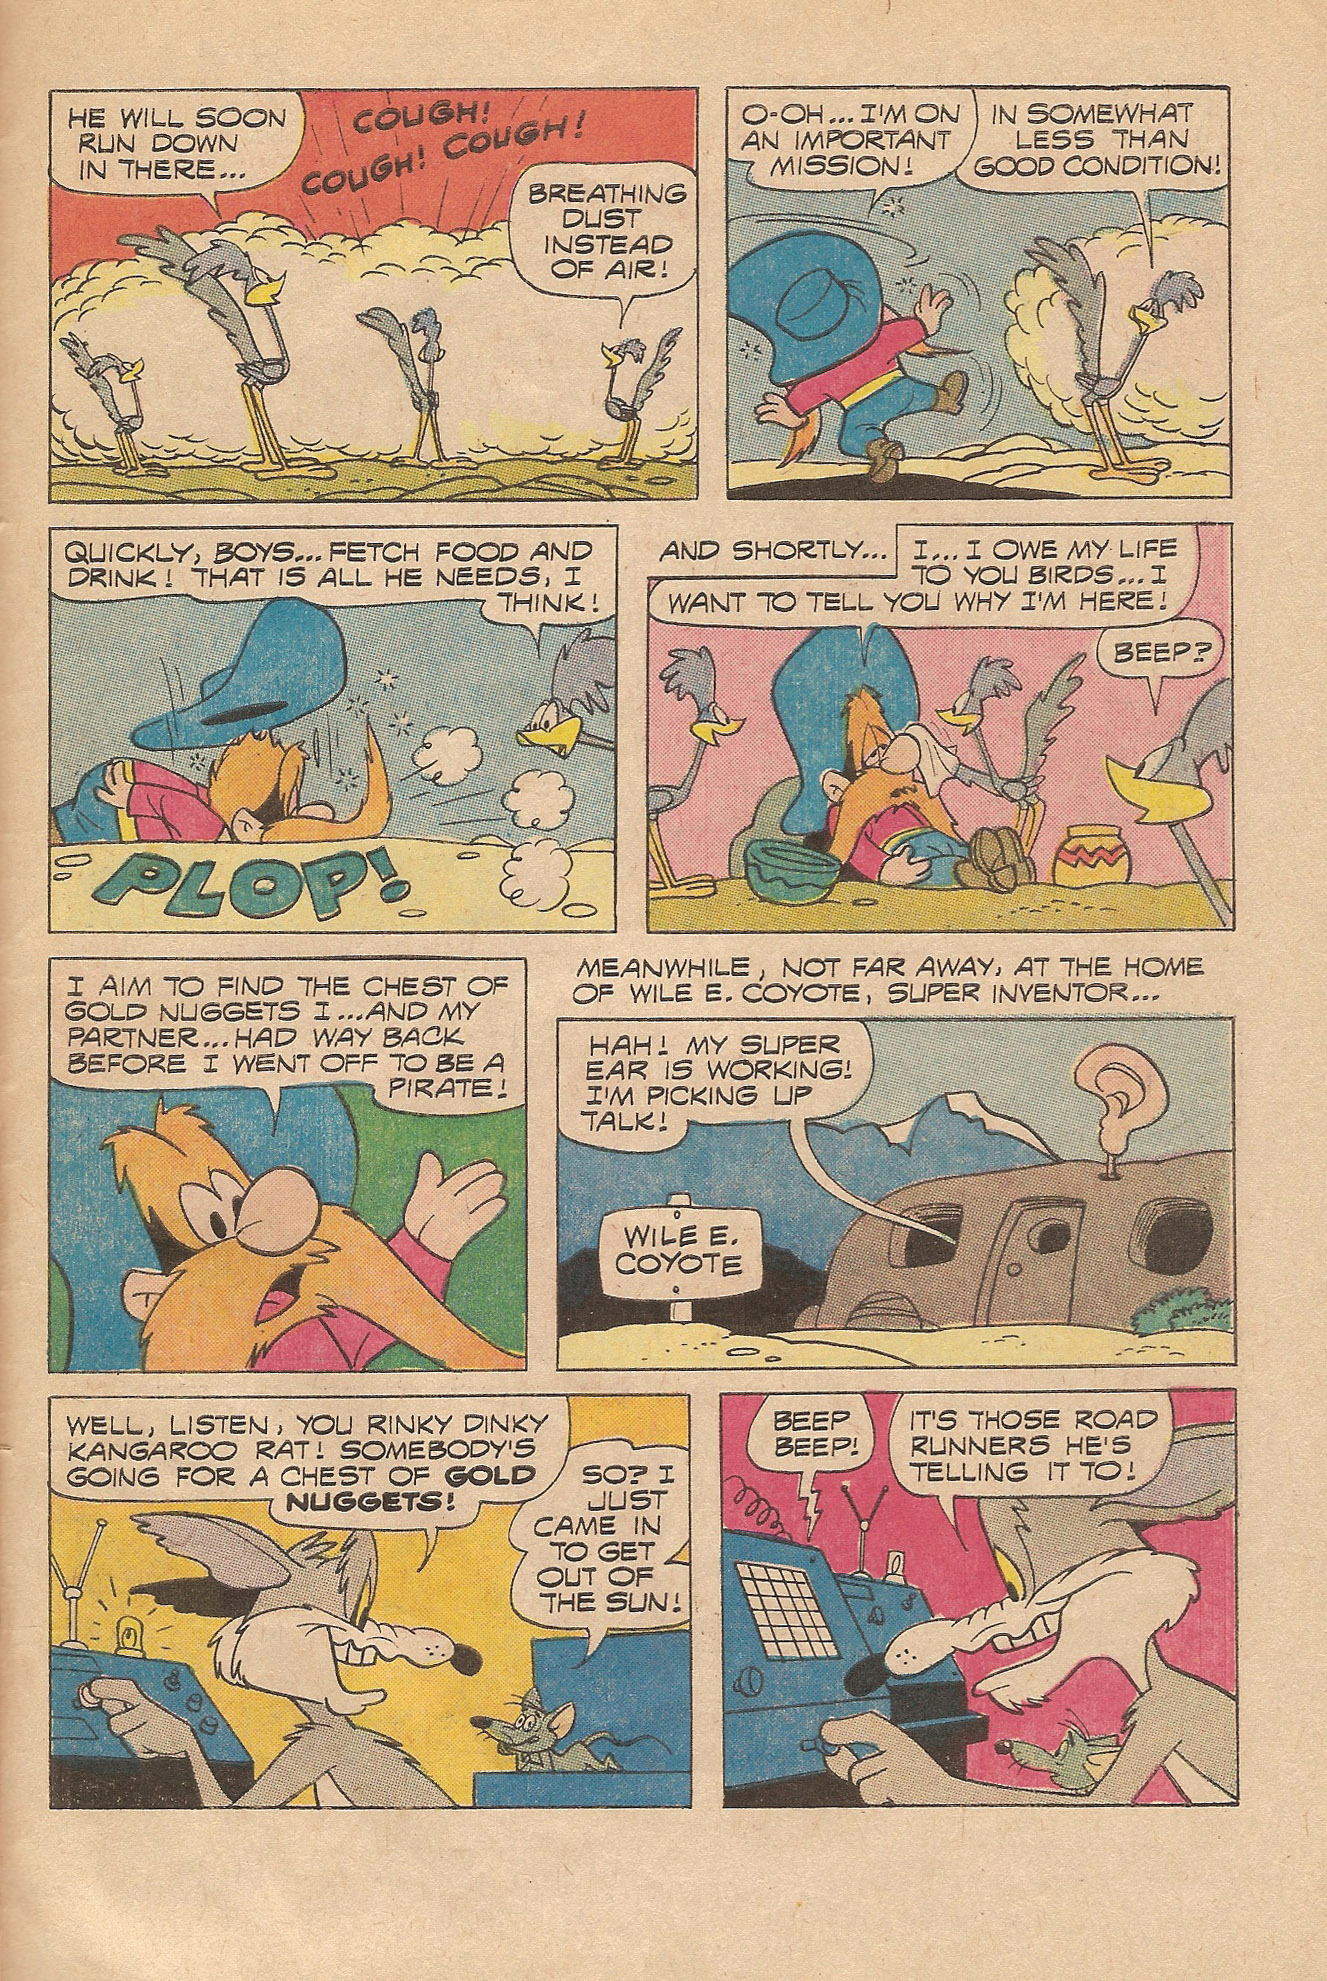 Read online Beep Beep The Road Runner comic -  Issue #29 - 27